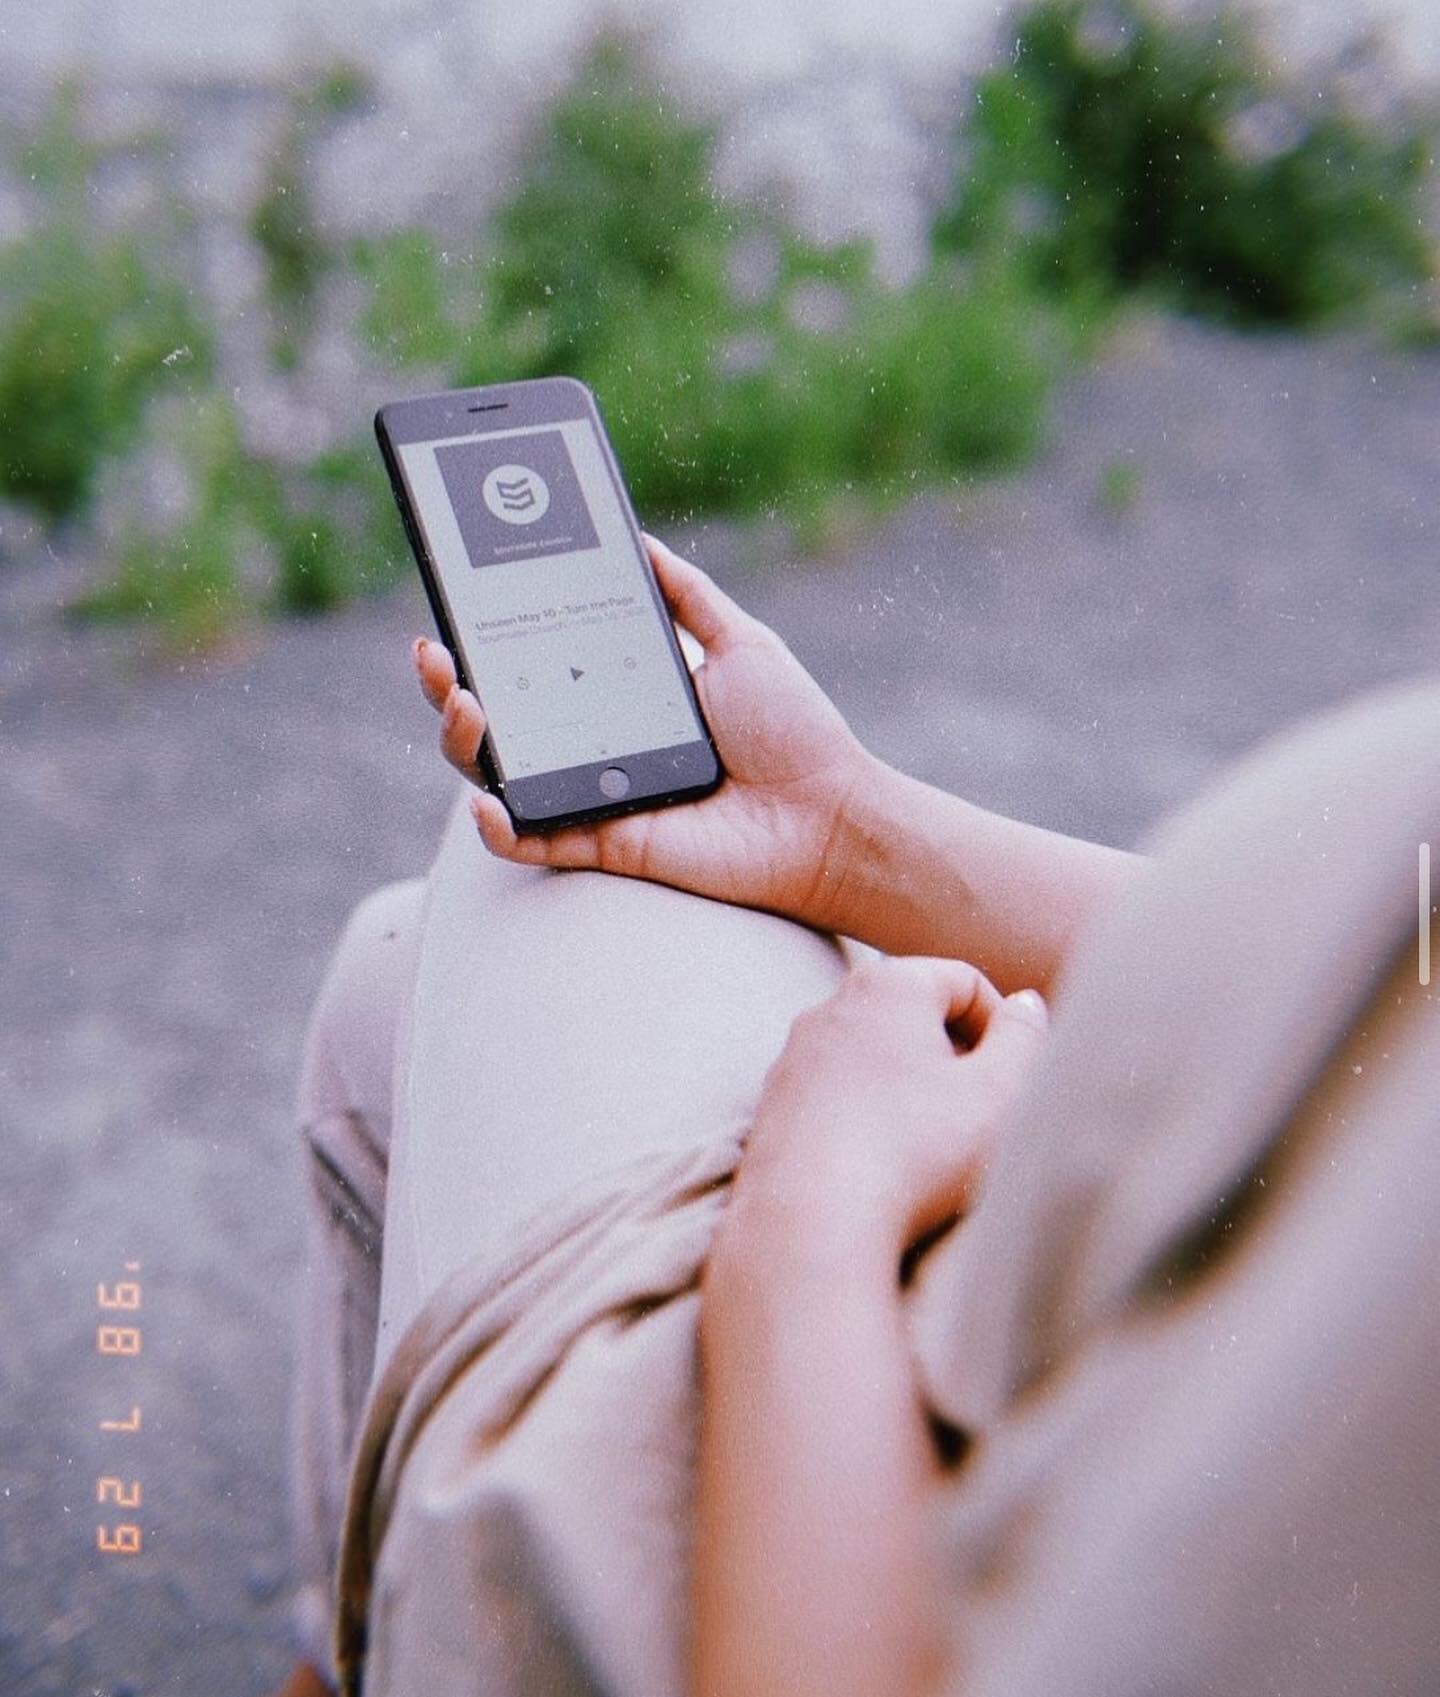 Shake it up! 

As the weather warms up, church is wherever you are this summer! We challenge you to get outside and catch up on a podcast. If you want to get even more practical, finish off your experience by doing something kind for someone in your 